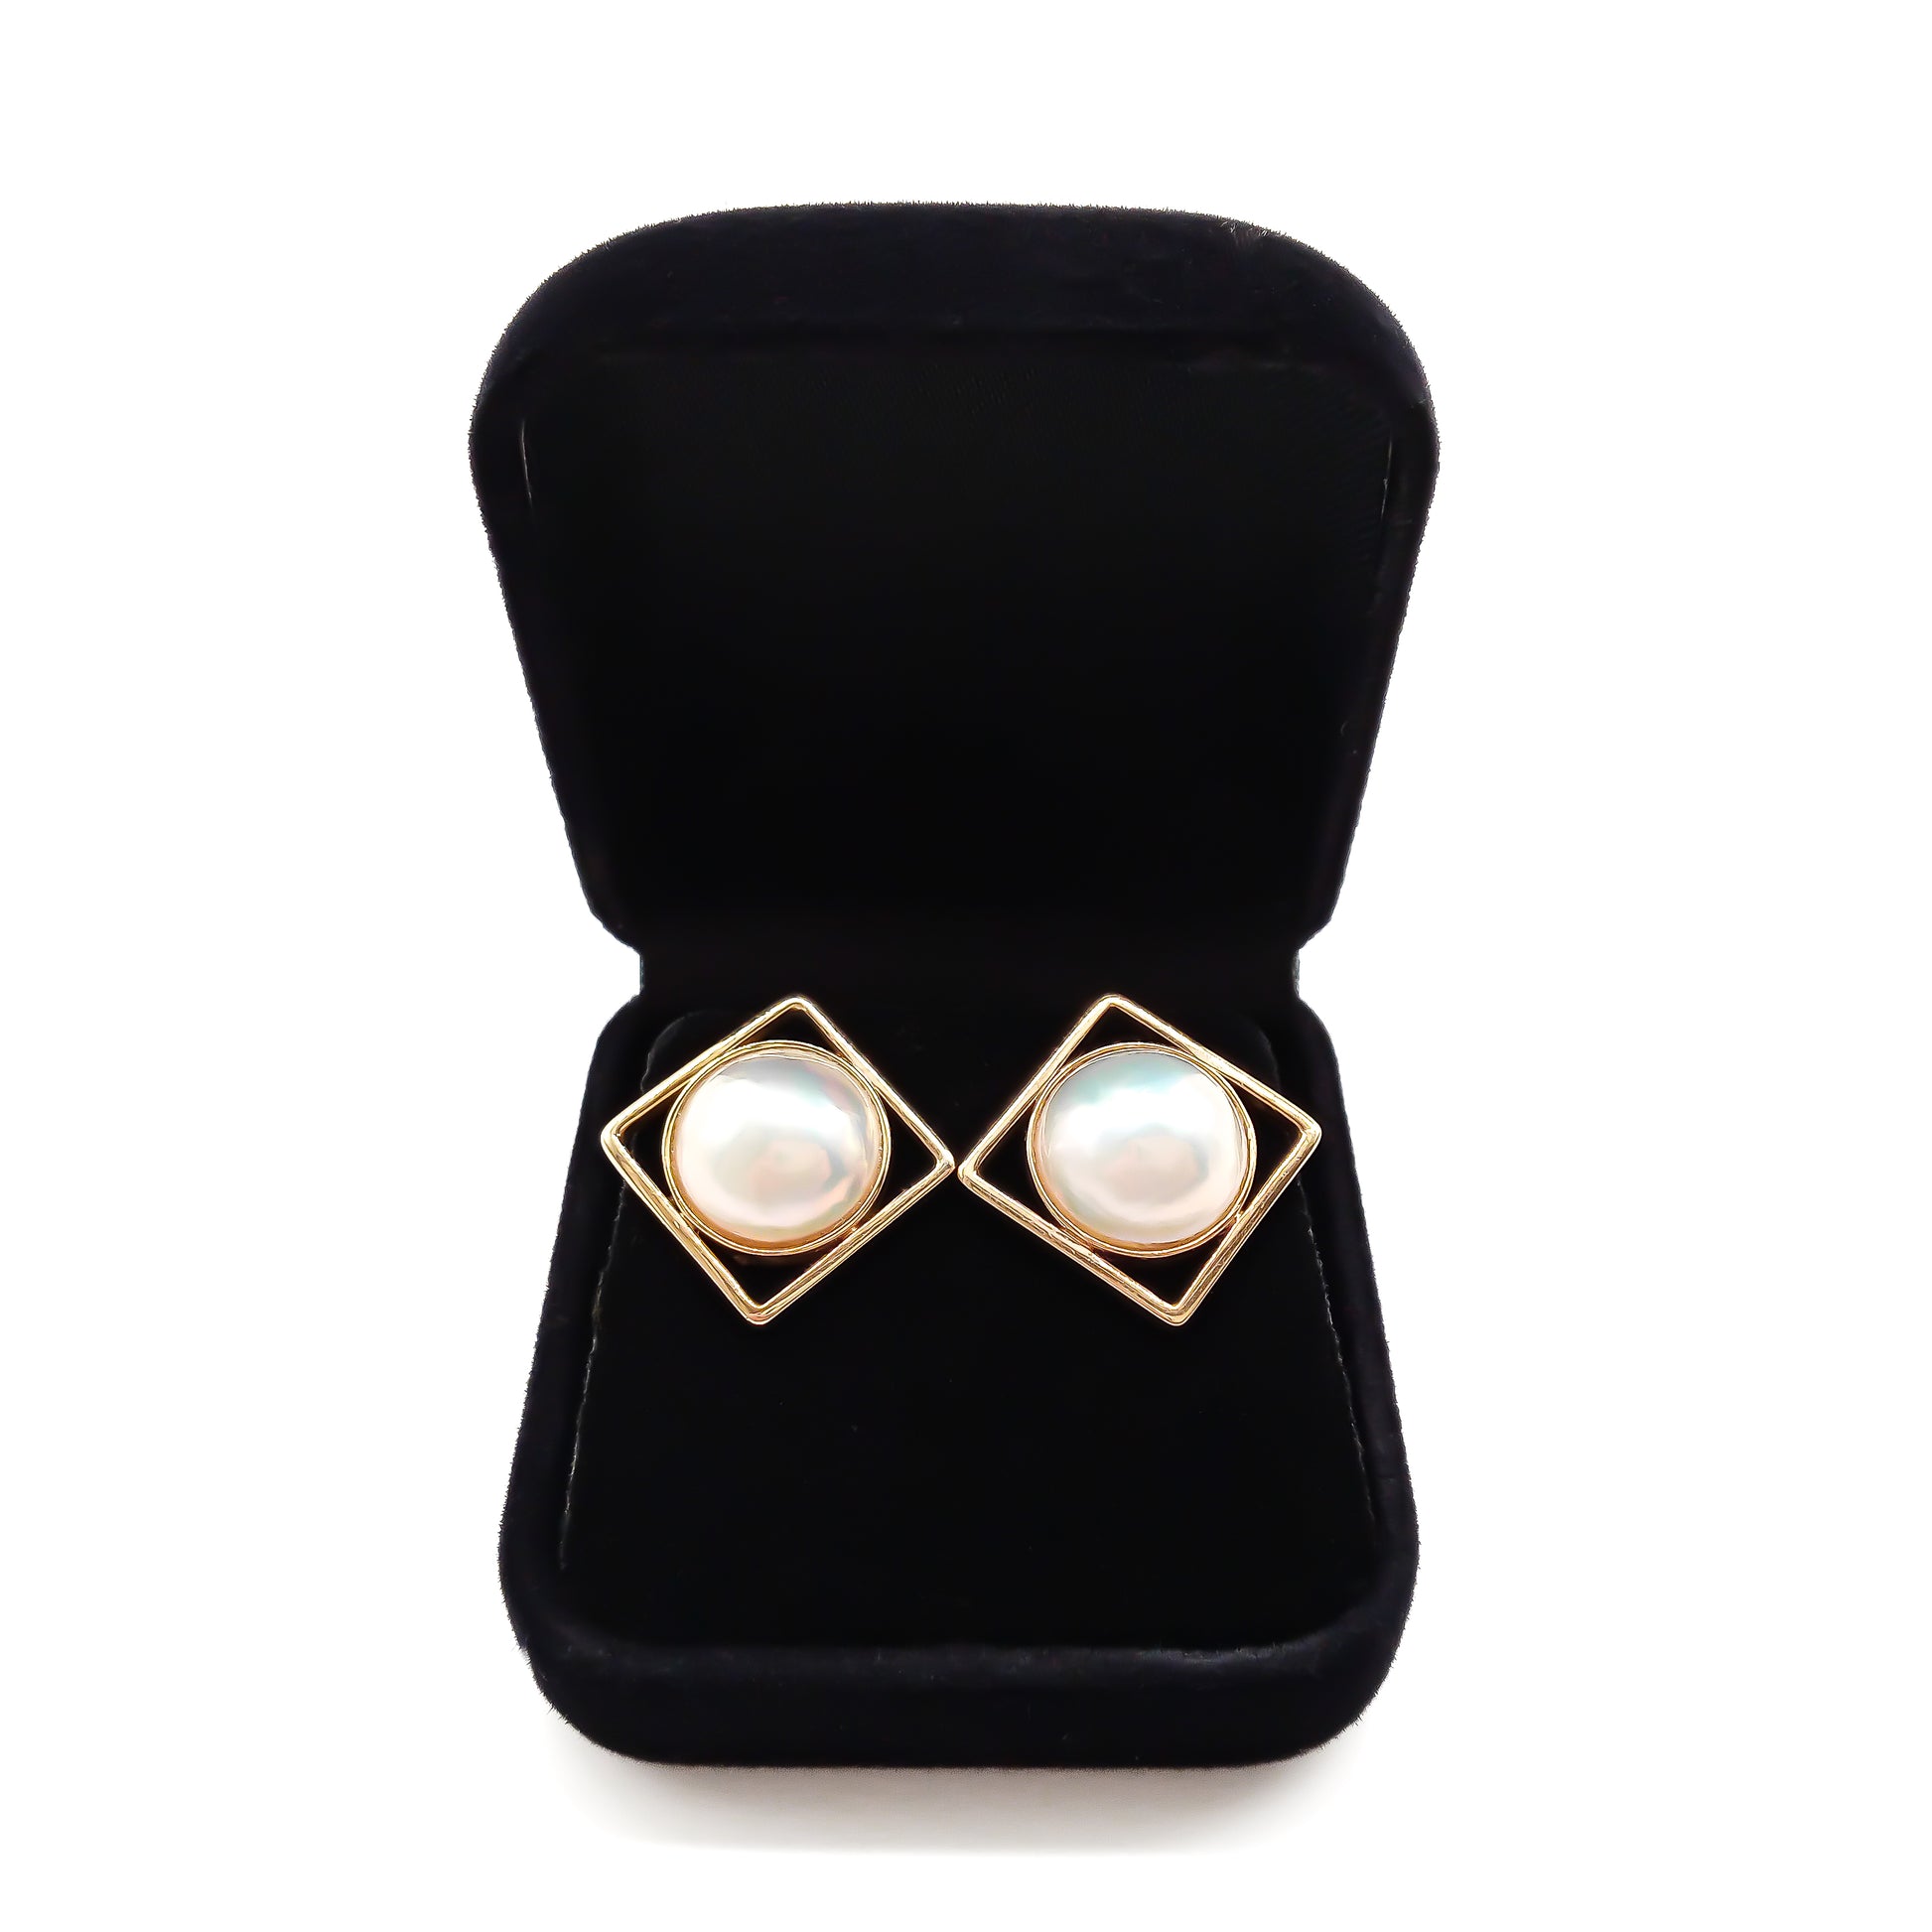 Classic 9ct gold stud earrings set with lustrous mabé pearls.